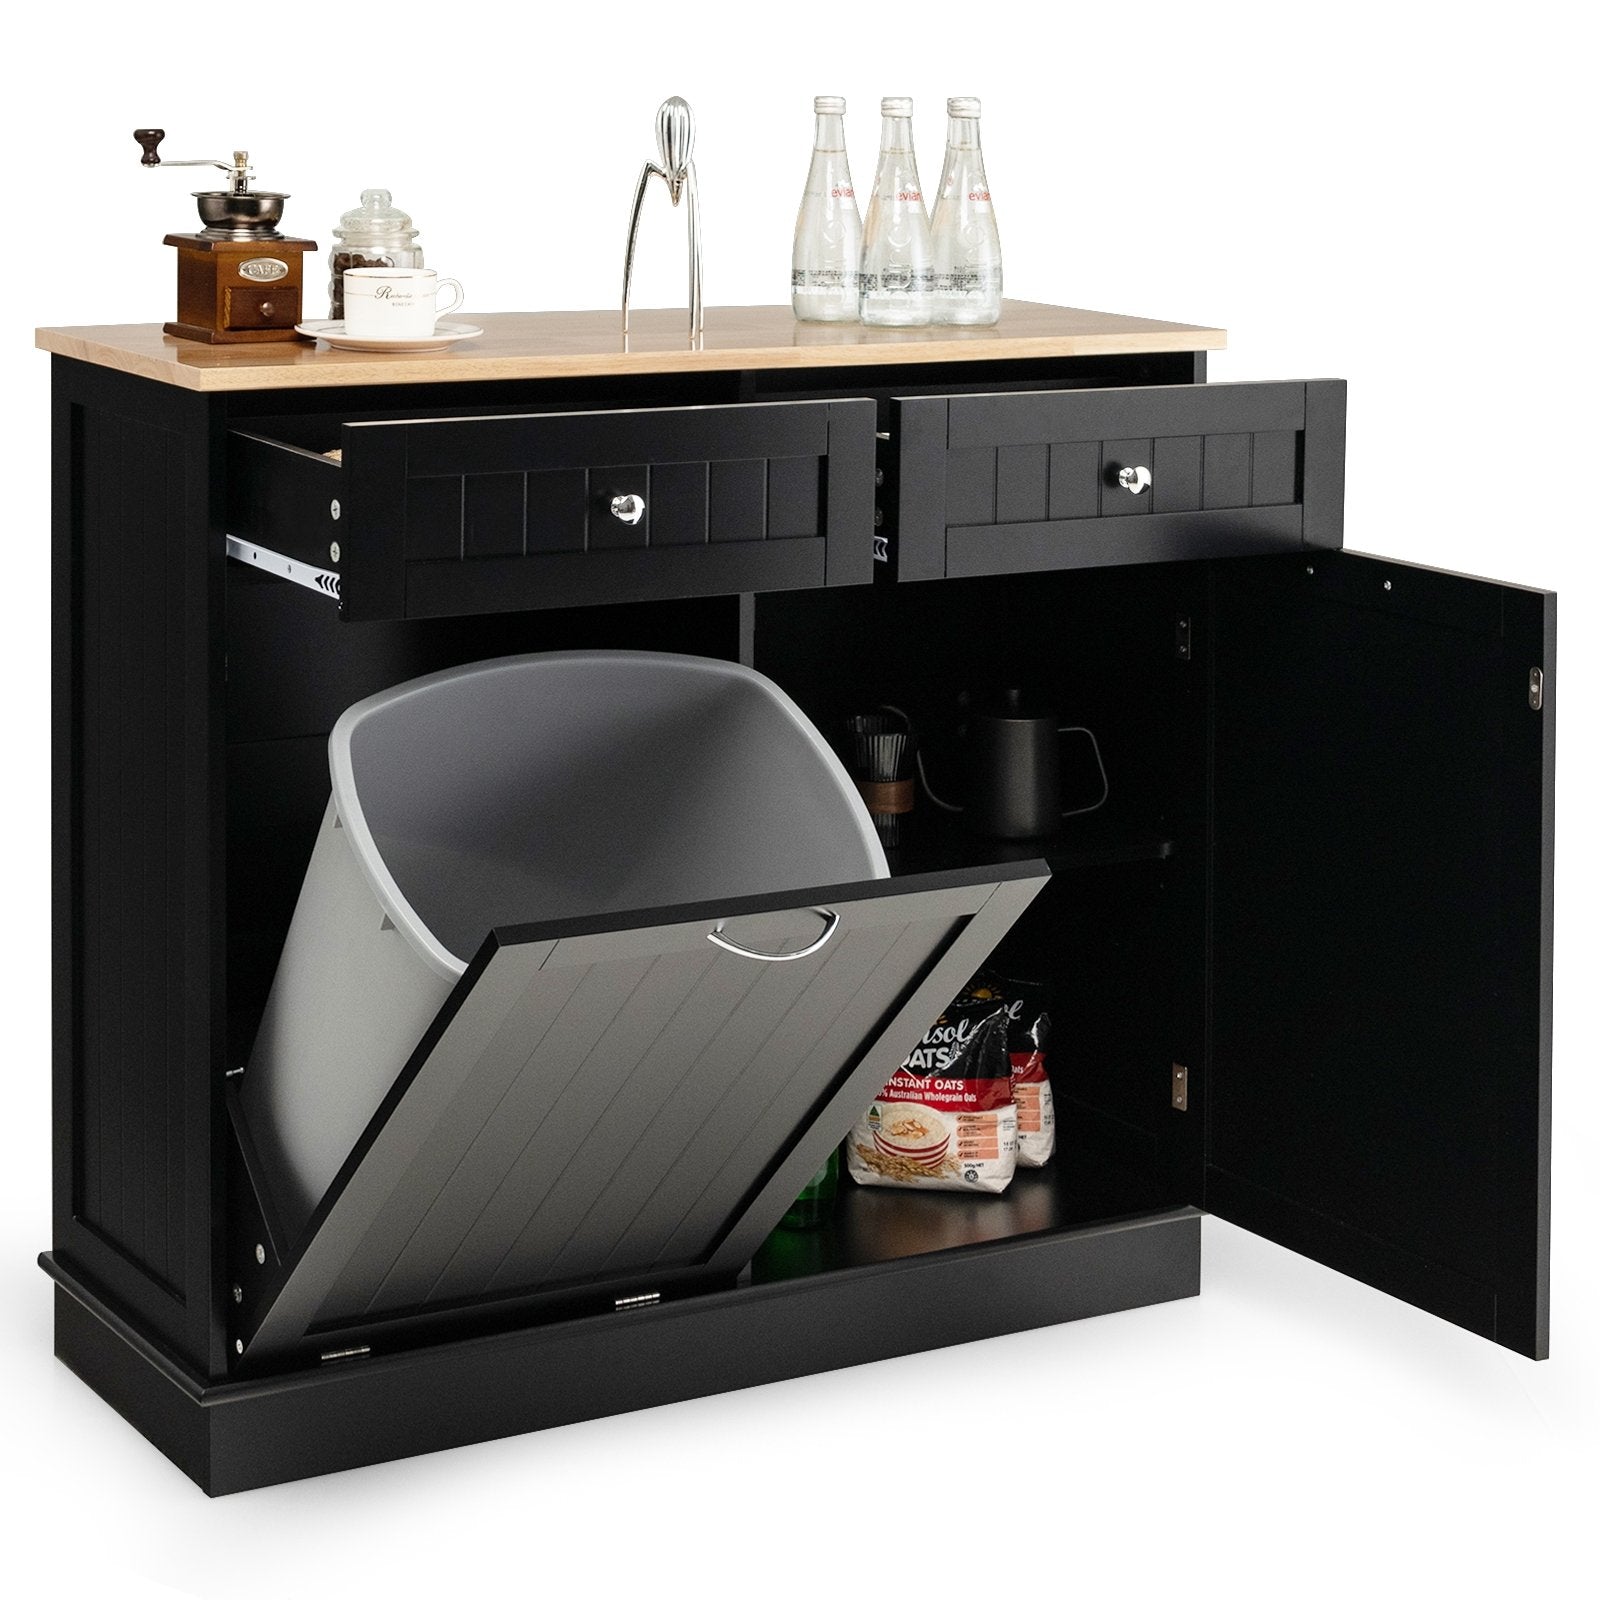 Rubber Wood Kitchen Trash Cabinet with Single Trash Can Holder and Adjustable Shelf, Black - Gallery Canada